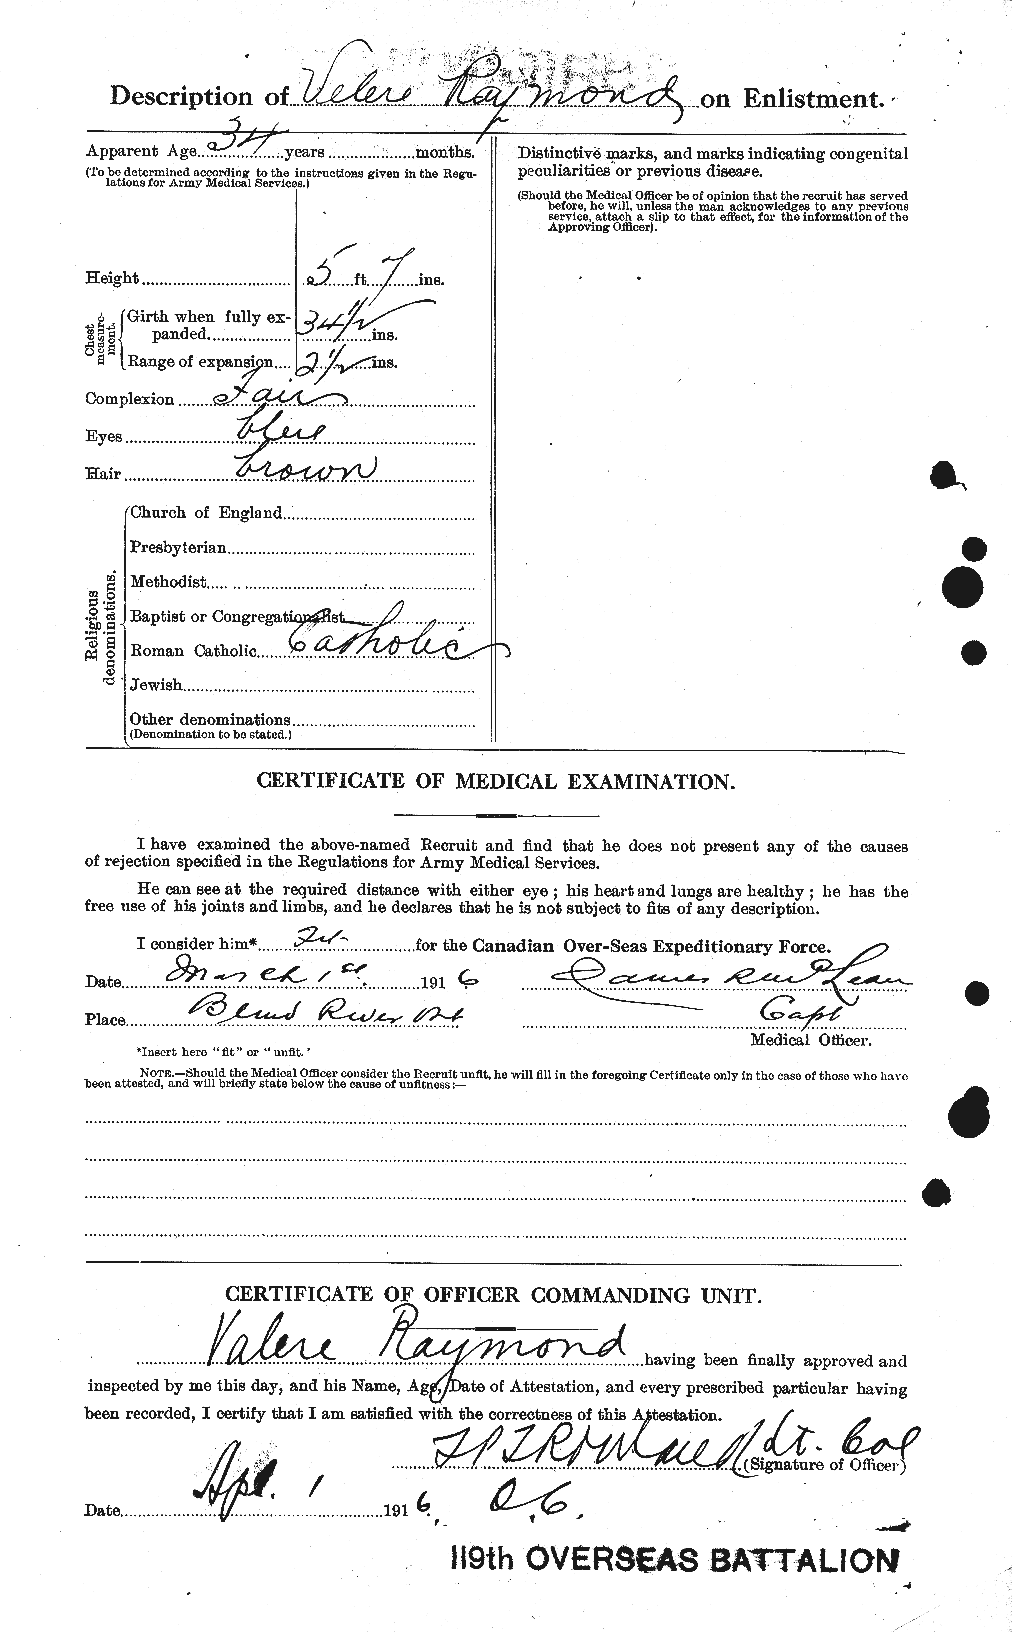 Personnel Records of the First World War - CEF 595468b